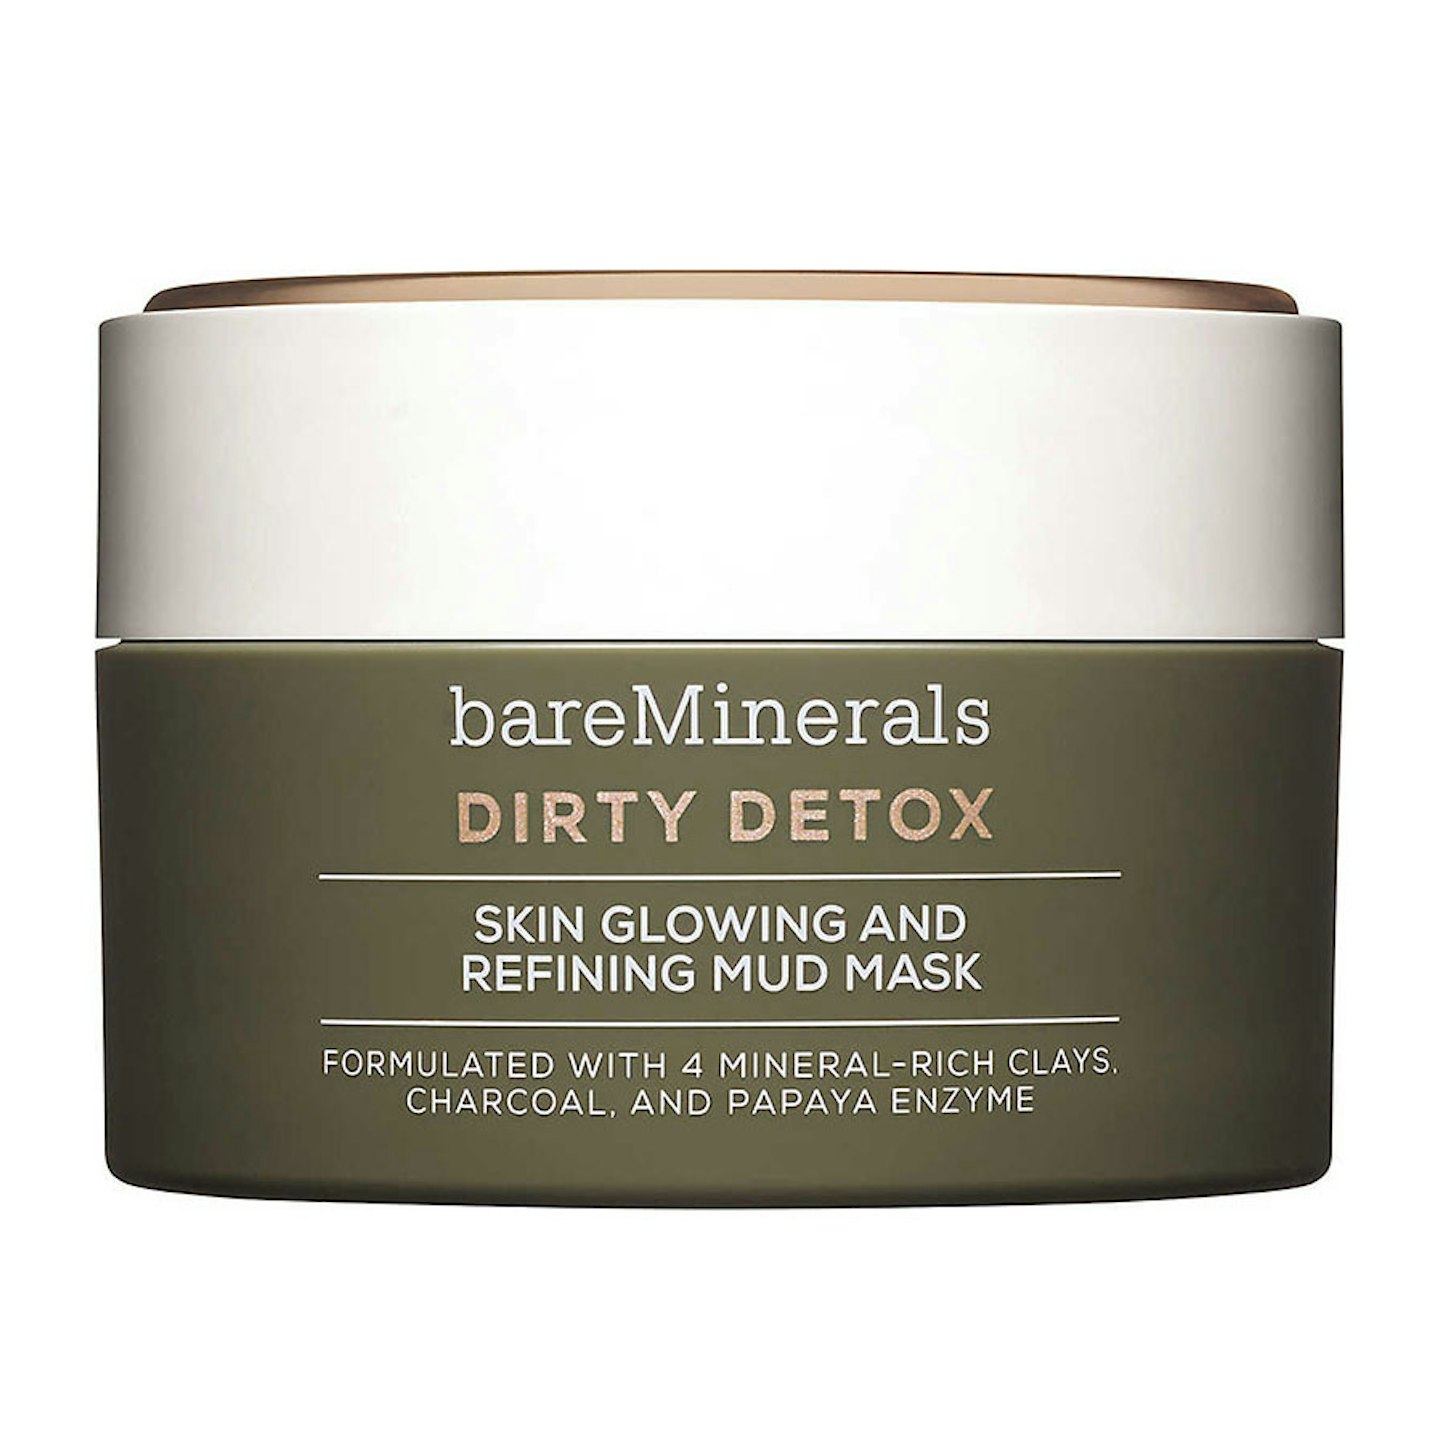 Bare Minerals Dirty Detox Skin Glowing And Refining Mud Mask, 33